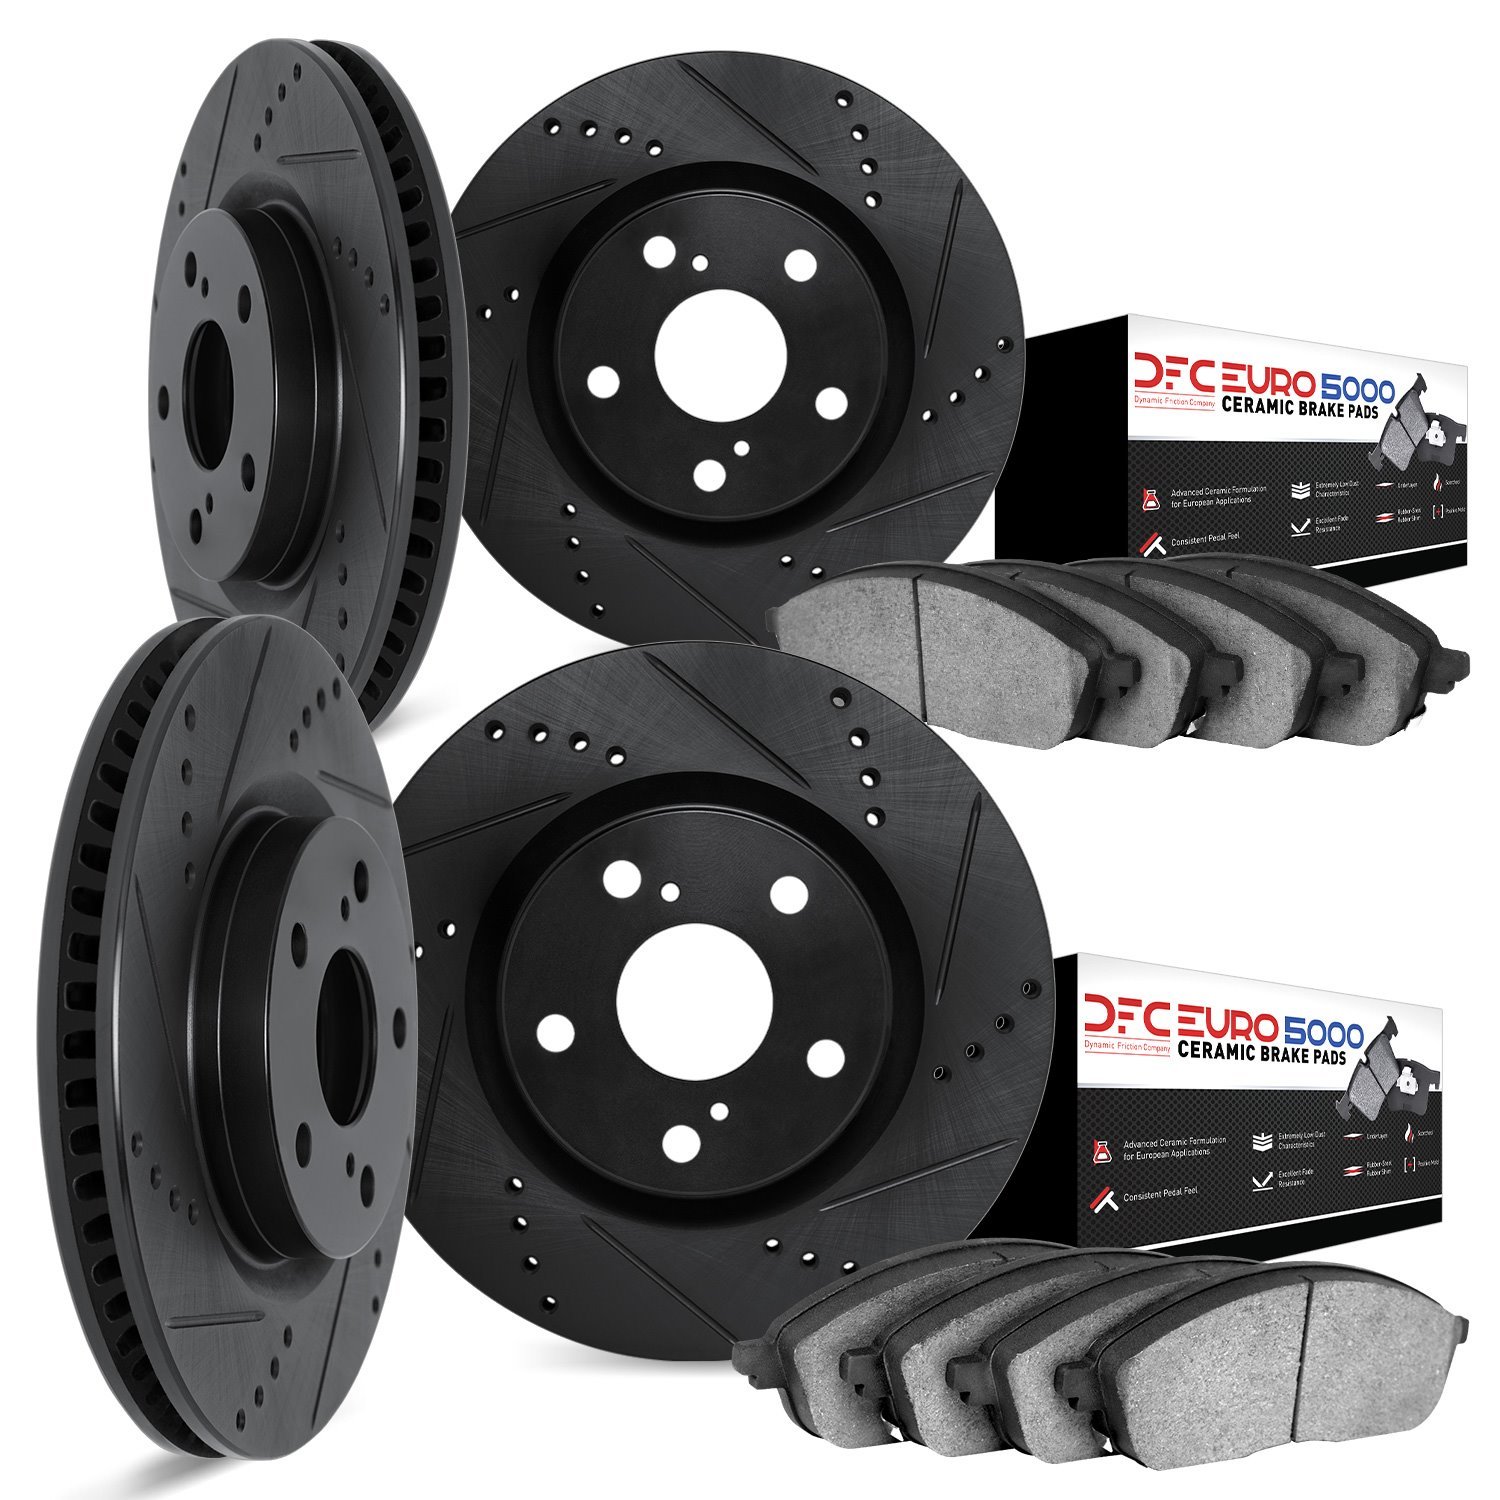 8604-39000 Drilled/Slotted Brake Rotors w/5000 Euro Ceramic Brake Pads Kit [Black], Fits Select Mopar, Position: Front and Rear